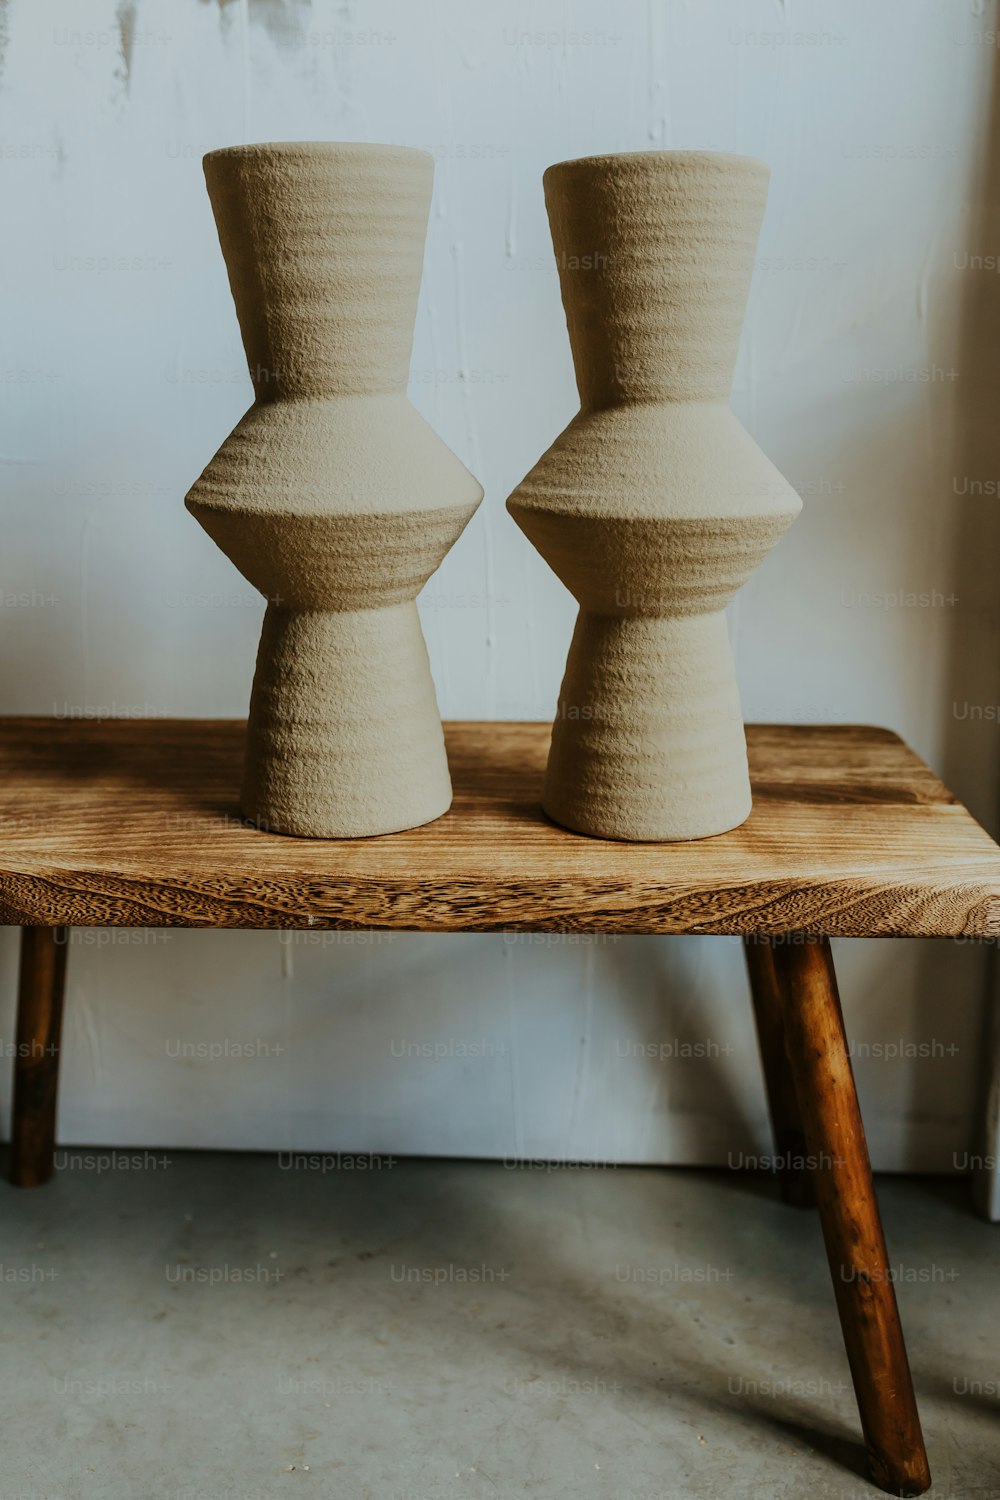 two vases sitting on top of a wooden table